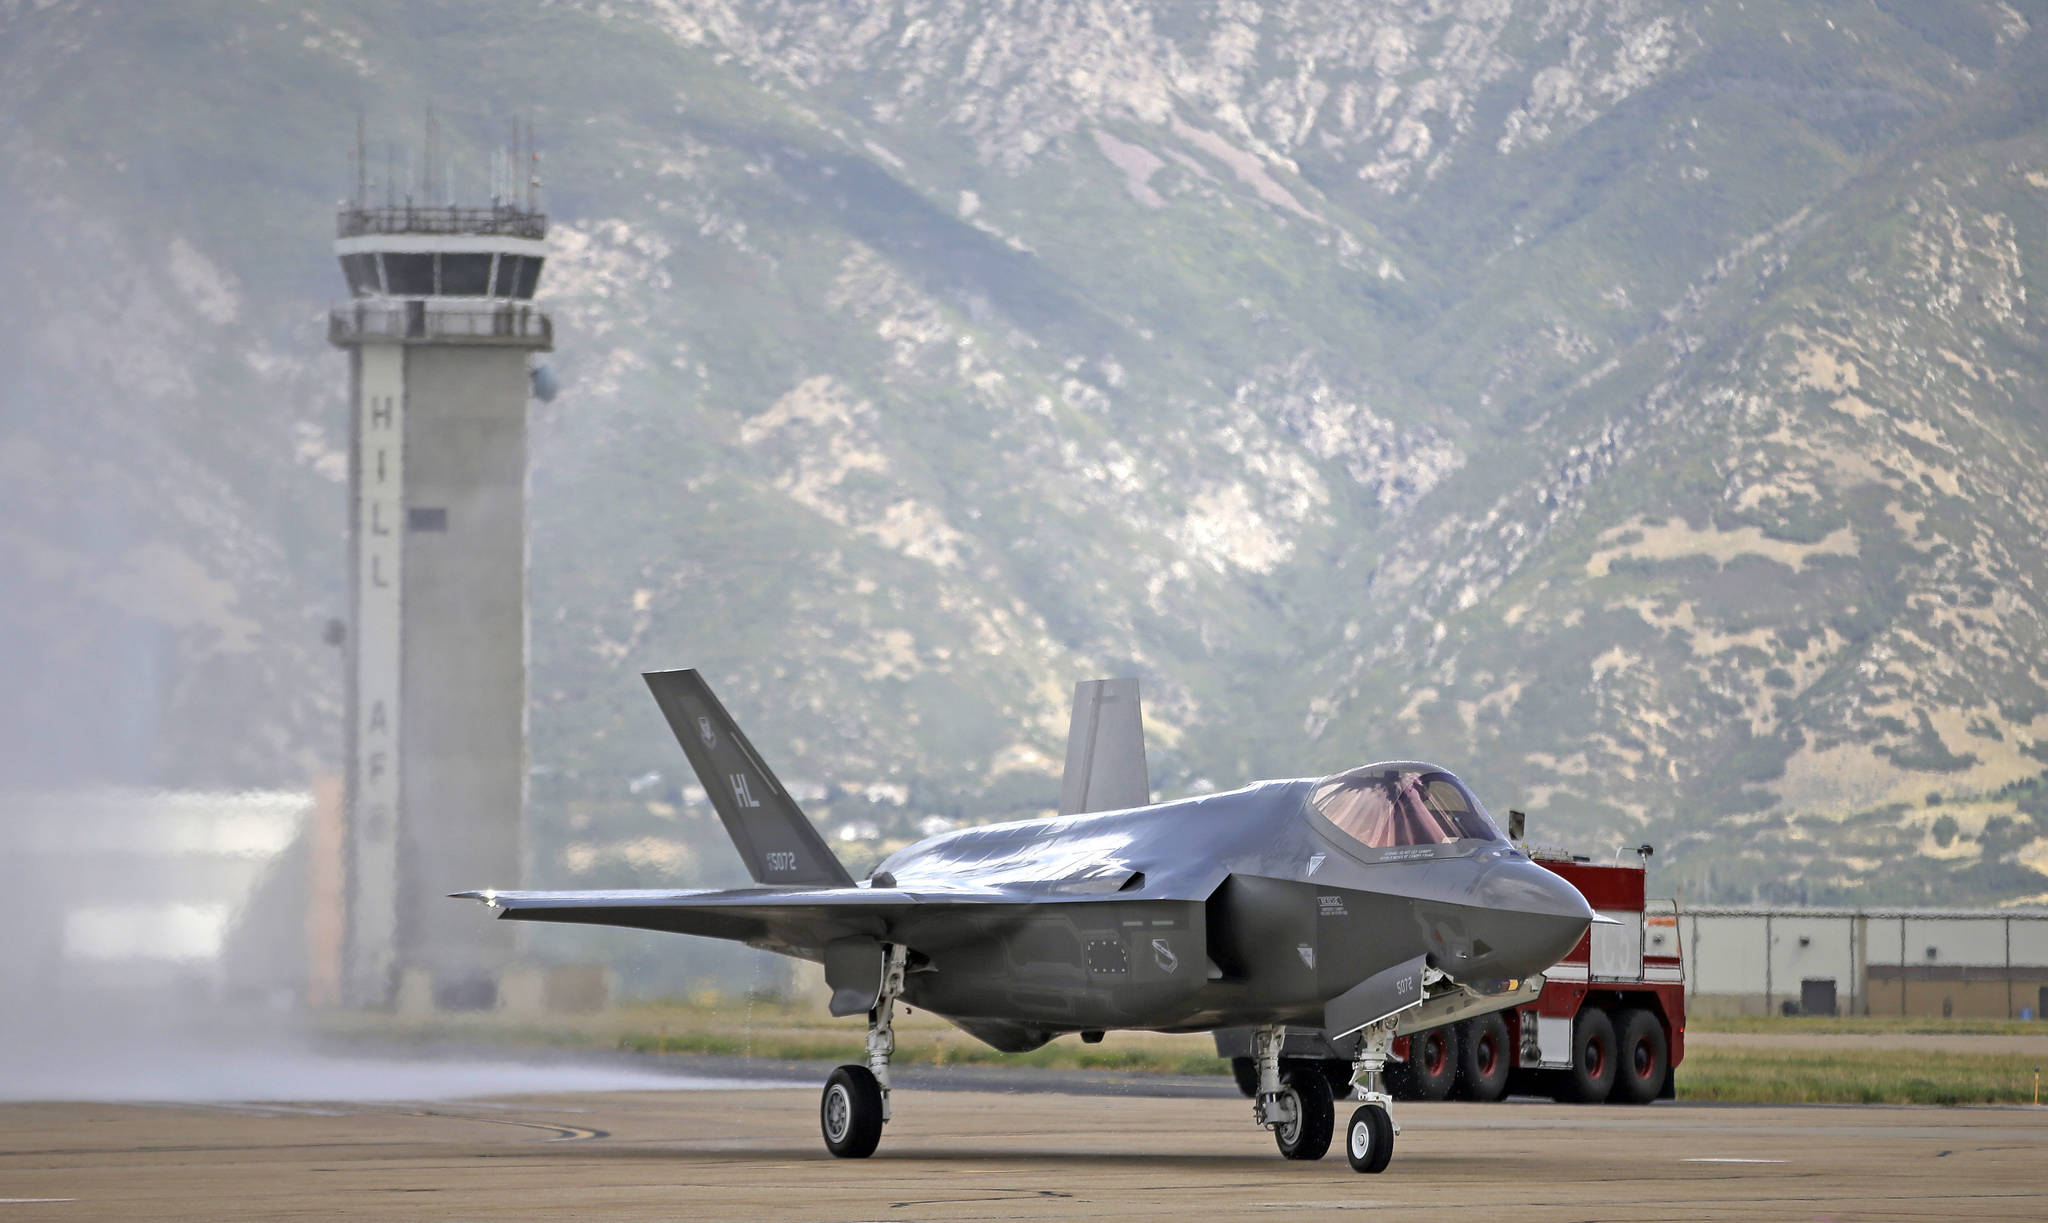 This Sept. 2, 2015 photo shows an F-35 jet arriving at its new operational base at Hill Air Force Base in Utah. (Rick Bowmer | The Associated Press File)